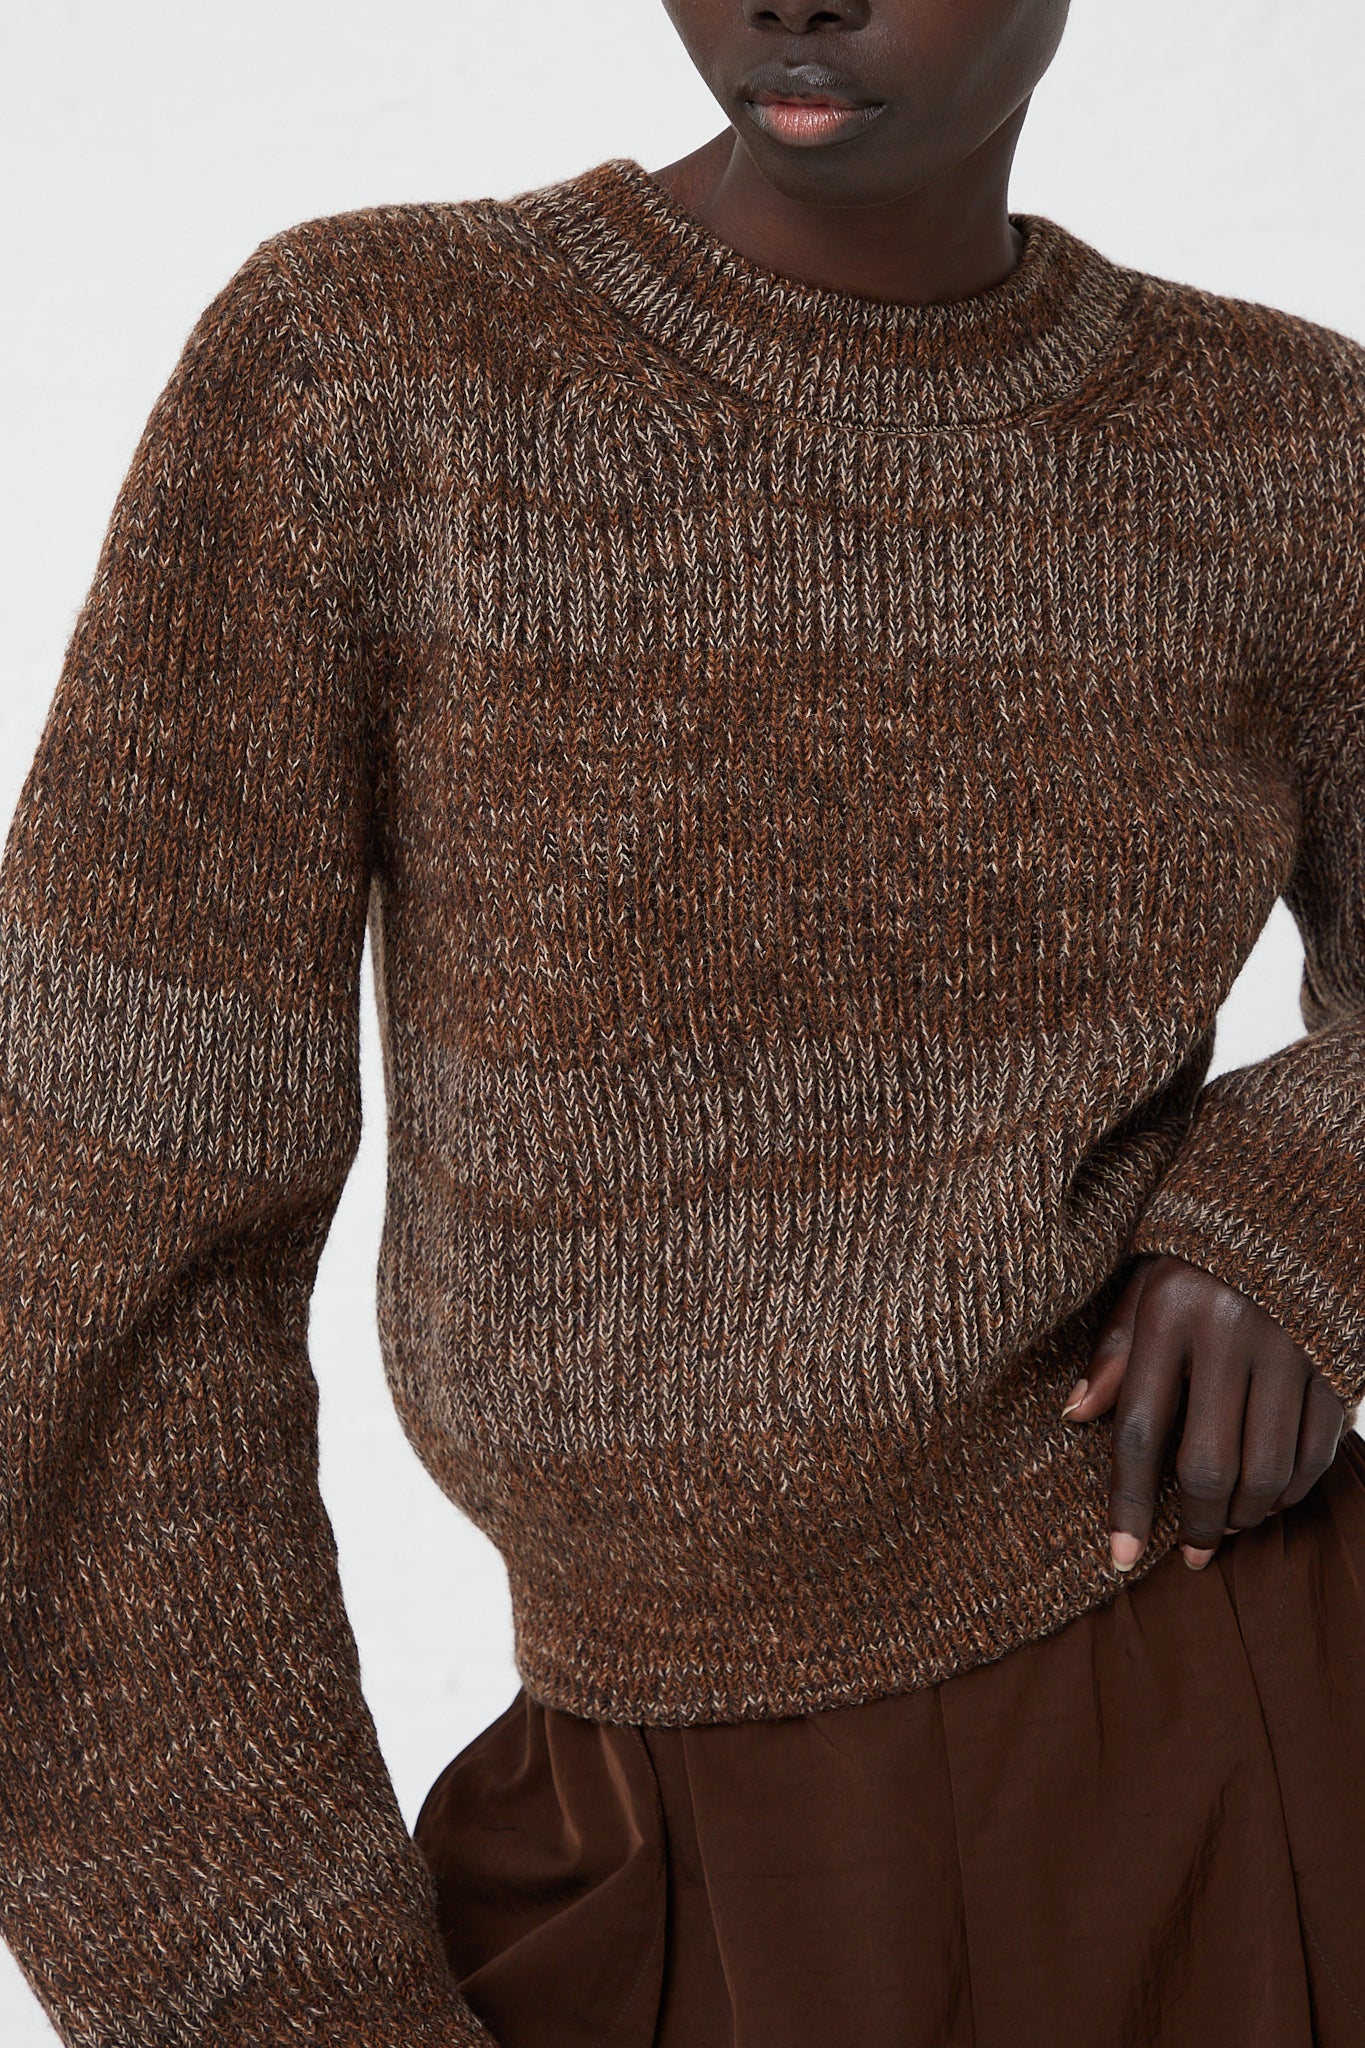 A woman wearing a Veronique Leroy Curved Sleeve Sweater in Oak, a relaxed fit, made of virgin wool.